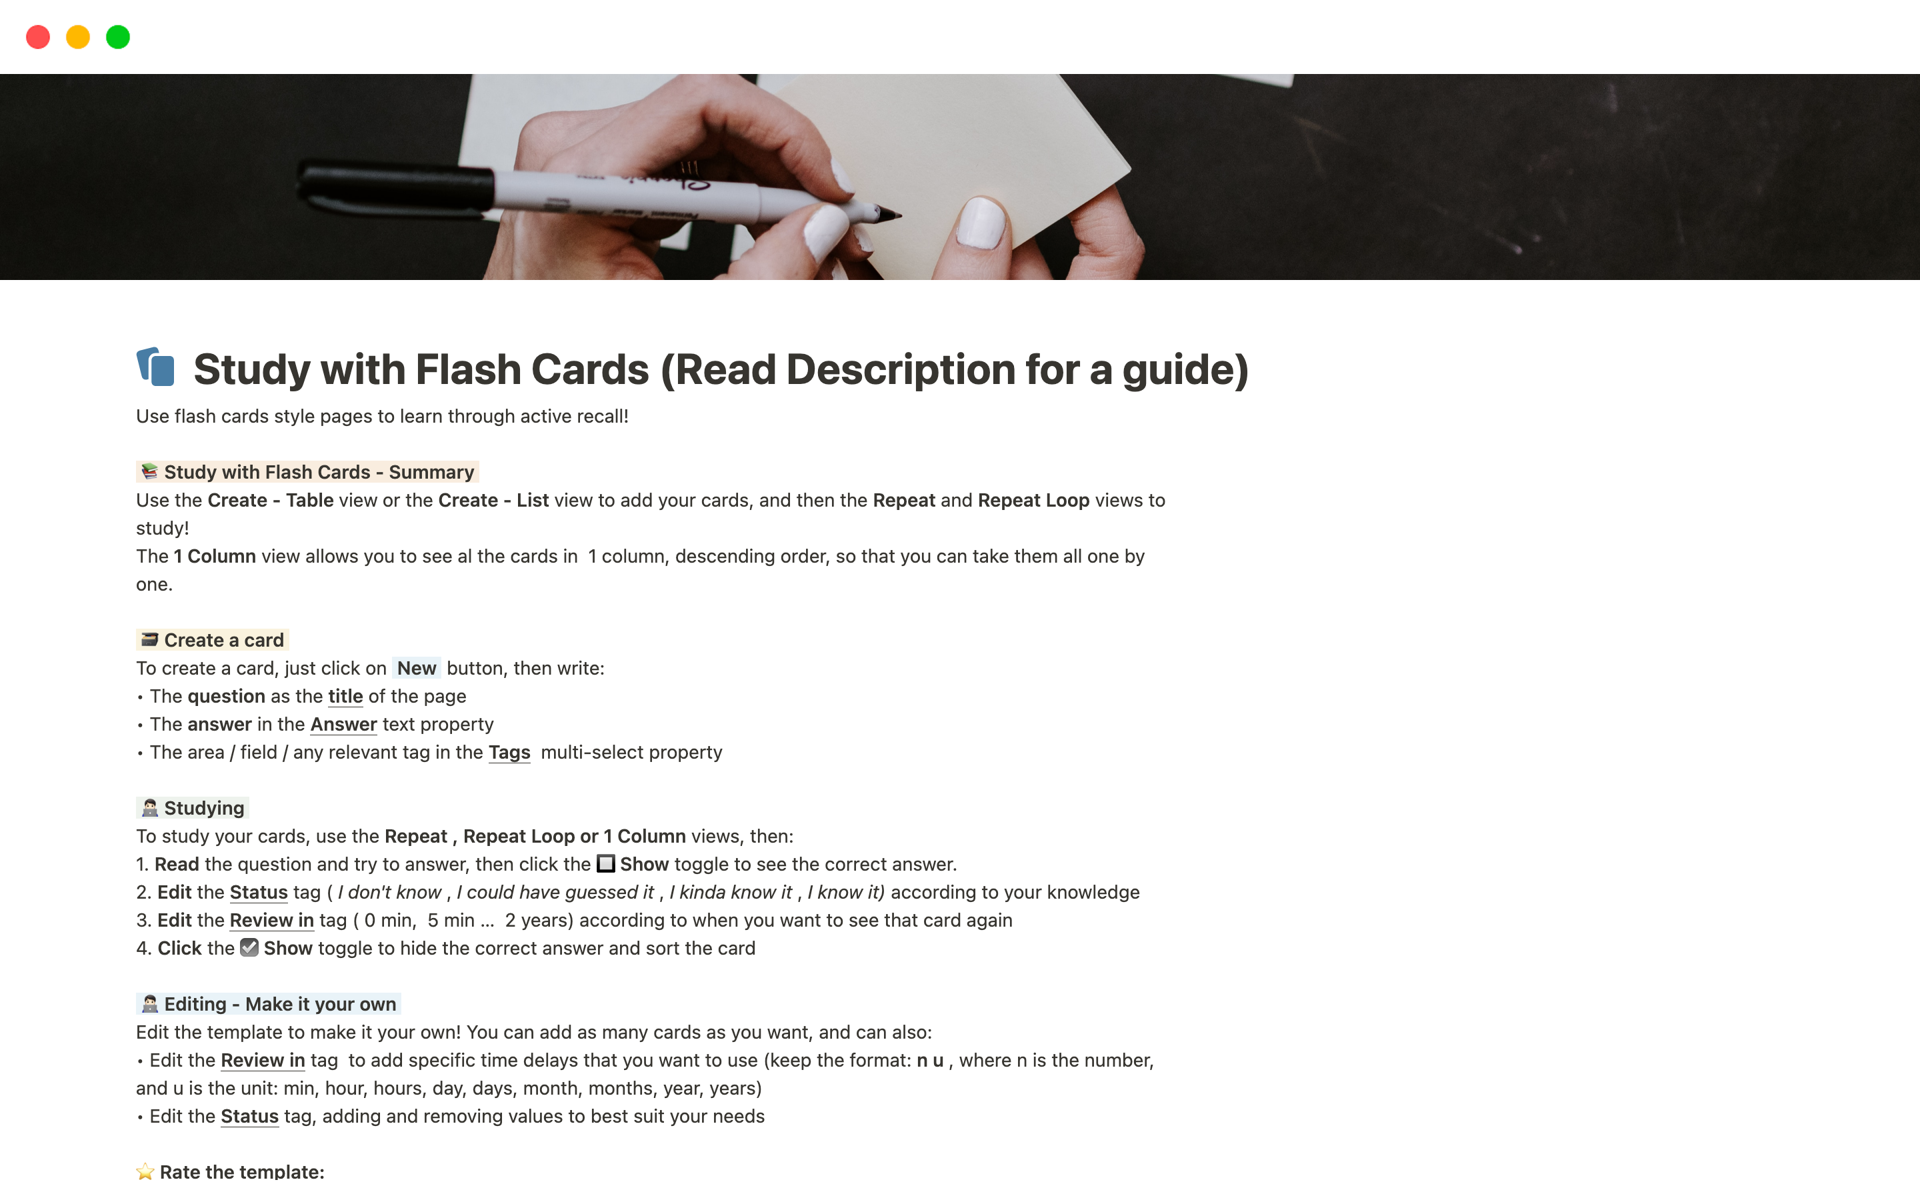 Learn in a Flash: Flashcards for Studying